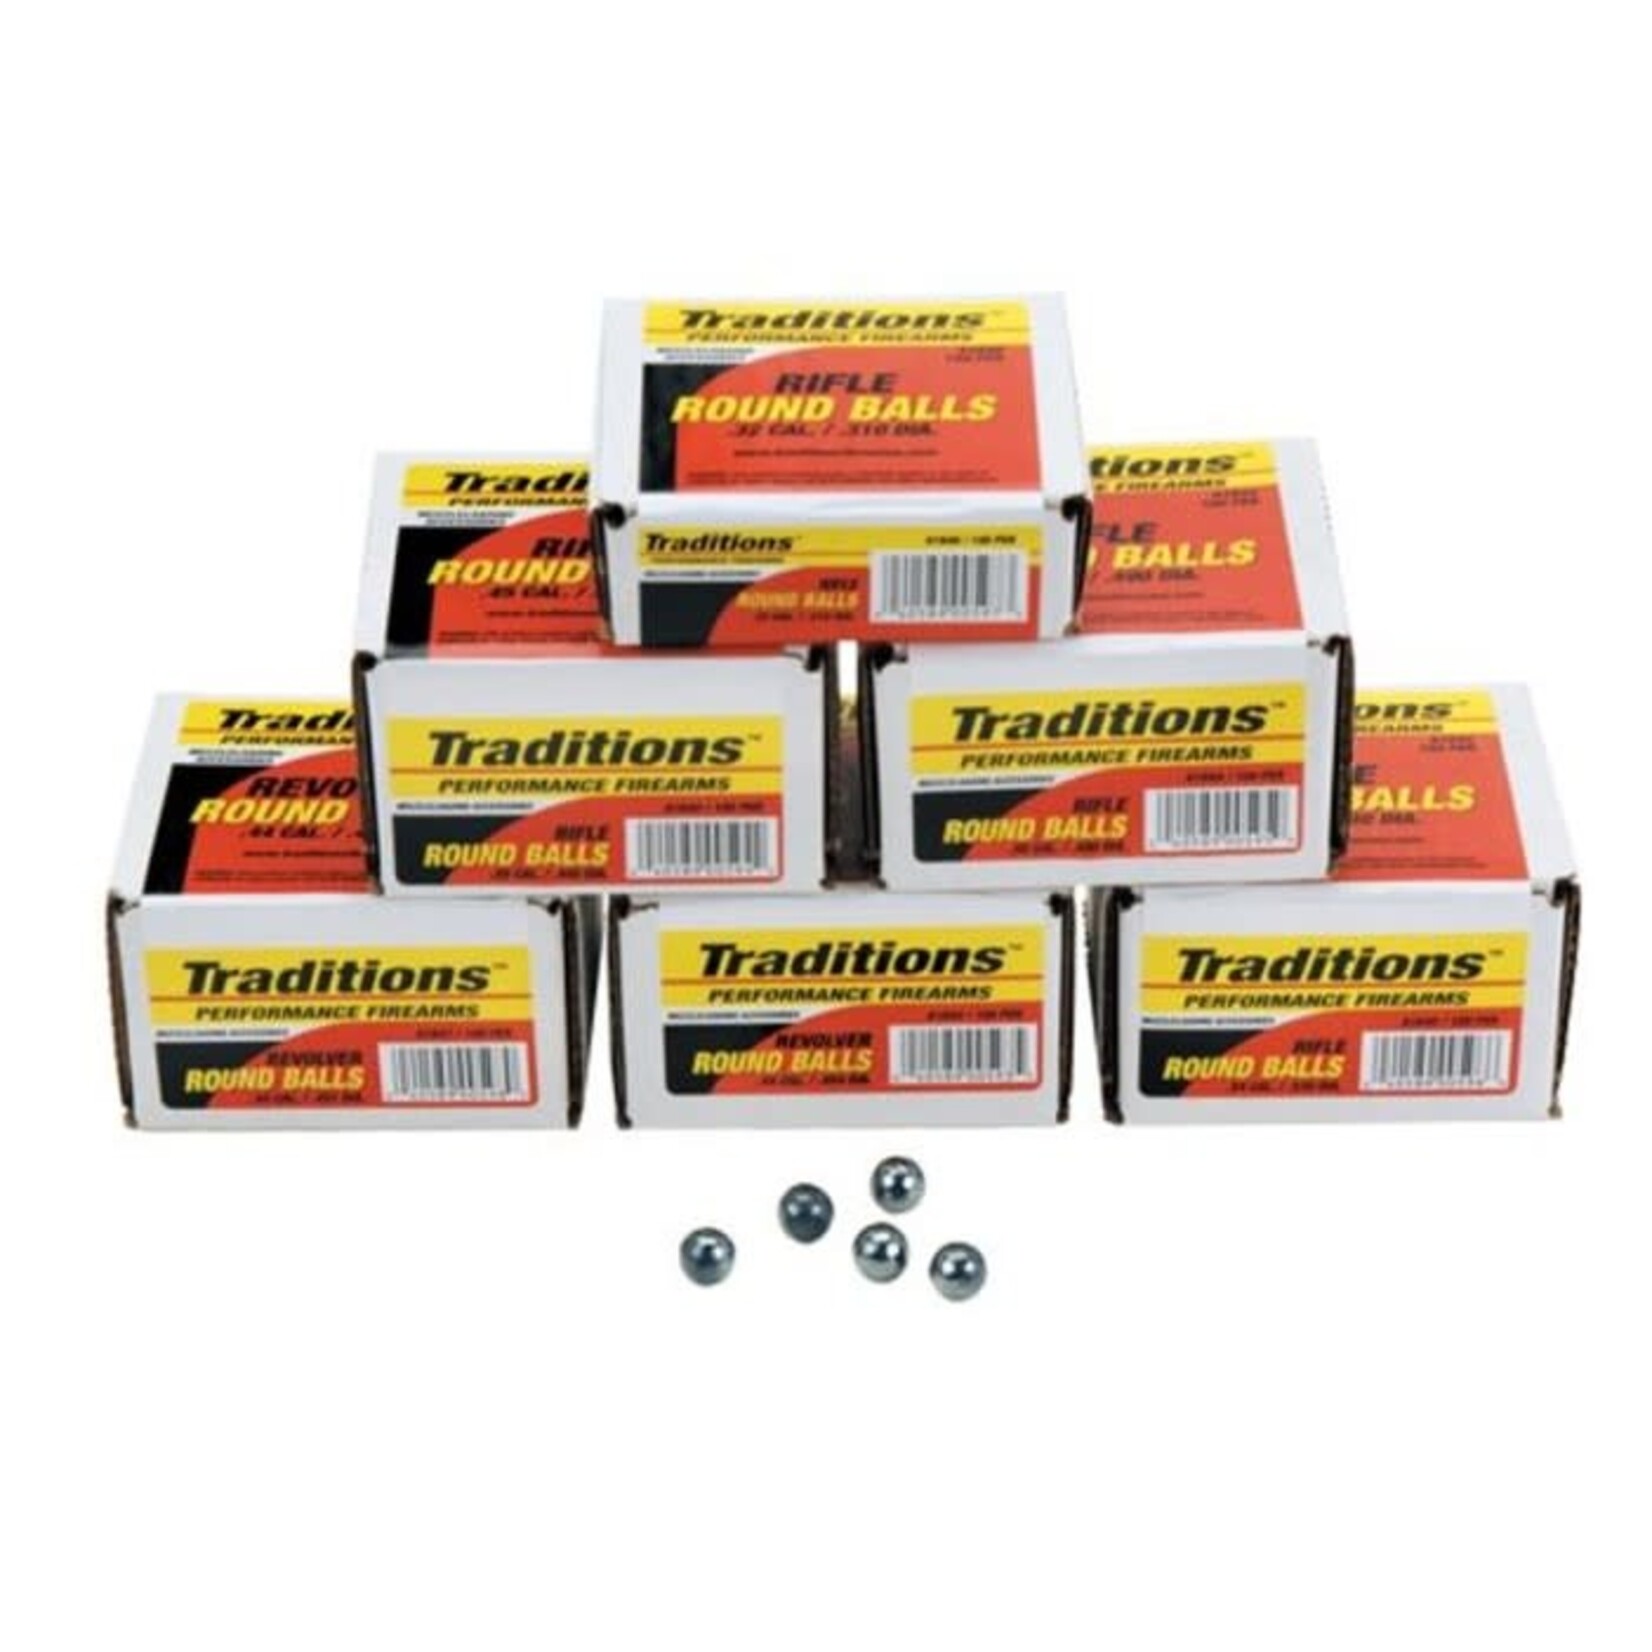 TRADITIONS Traditions Muzzle Loader Round BALLS 36CAL 65GR